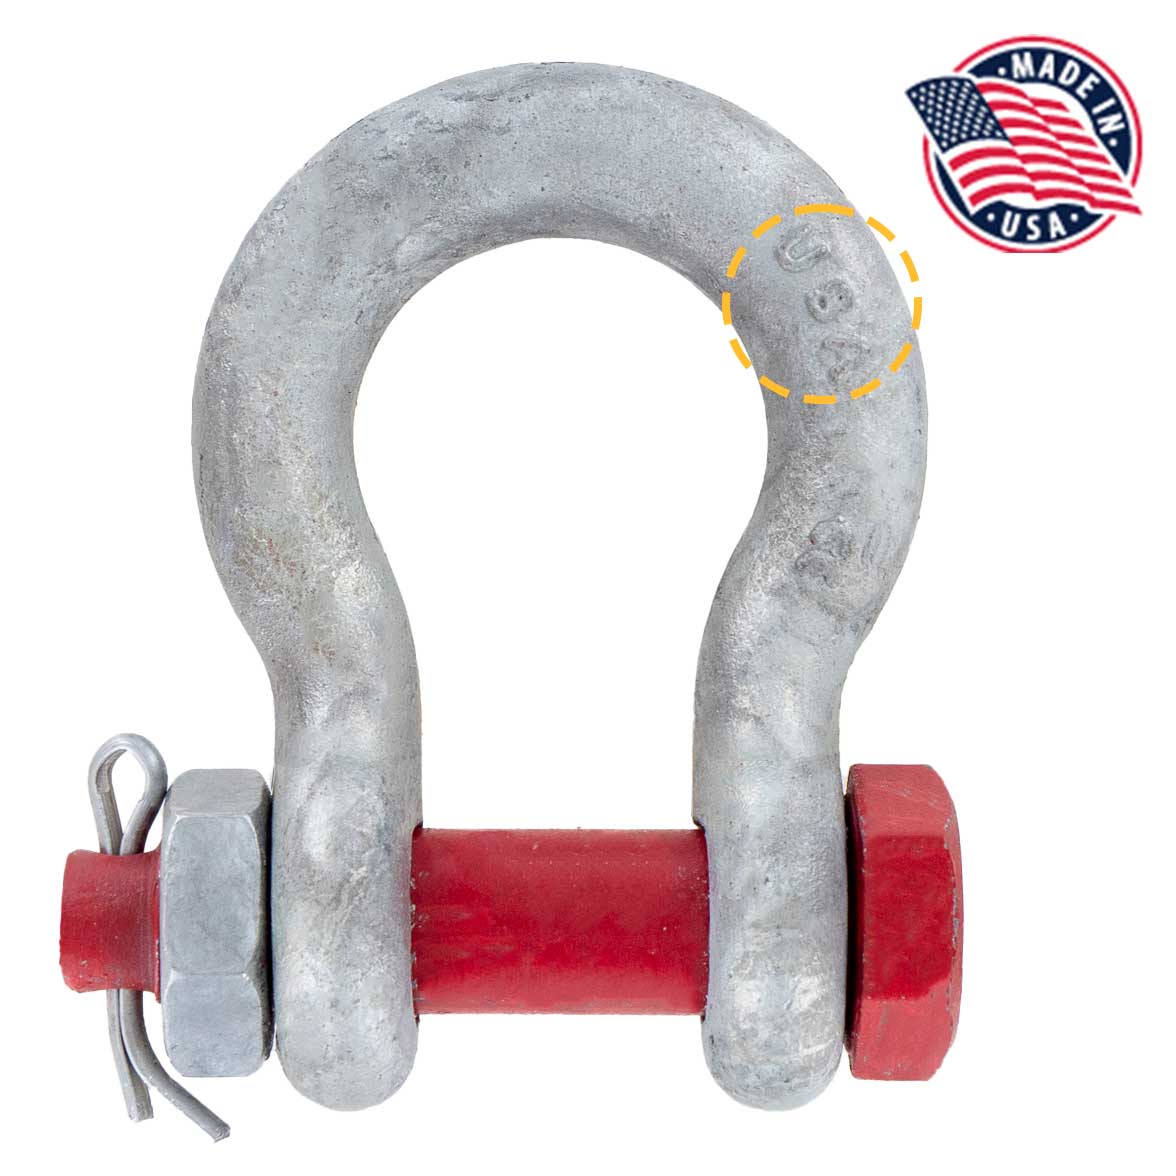 3/8" Crosby® Bolt Type Anchor Shackle | G-2130 - 1 Ton made in USA